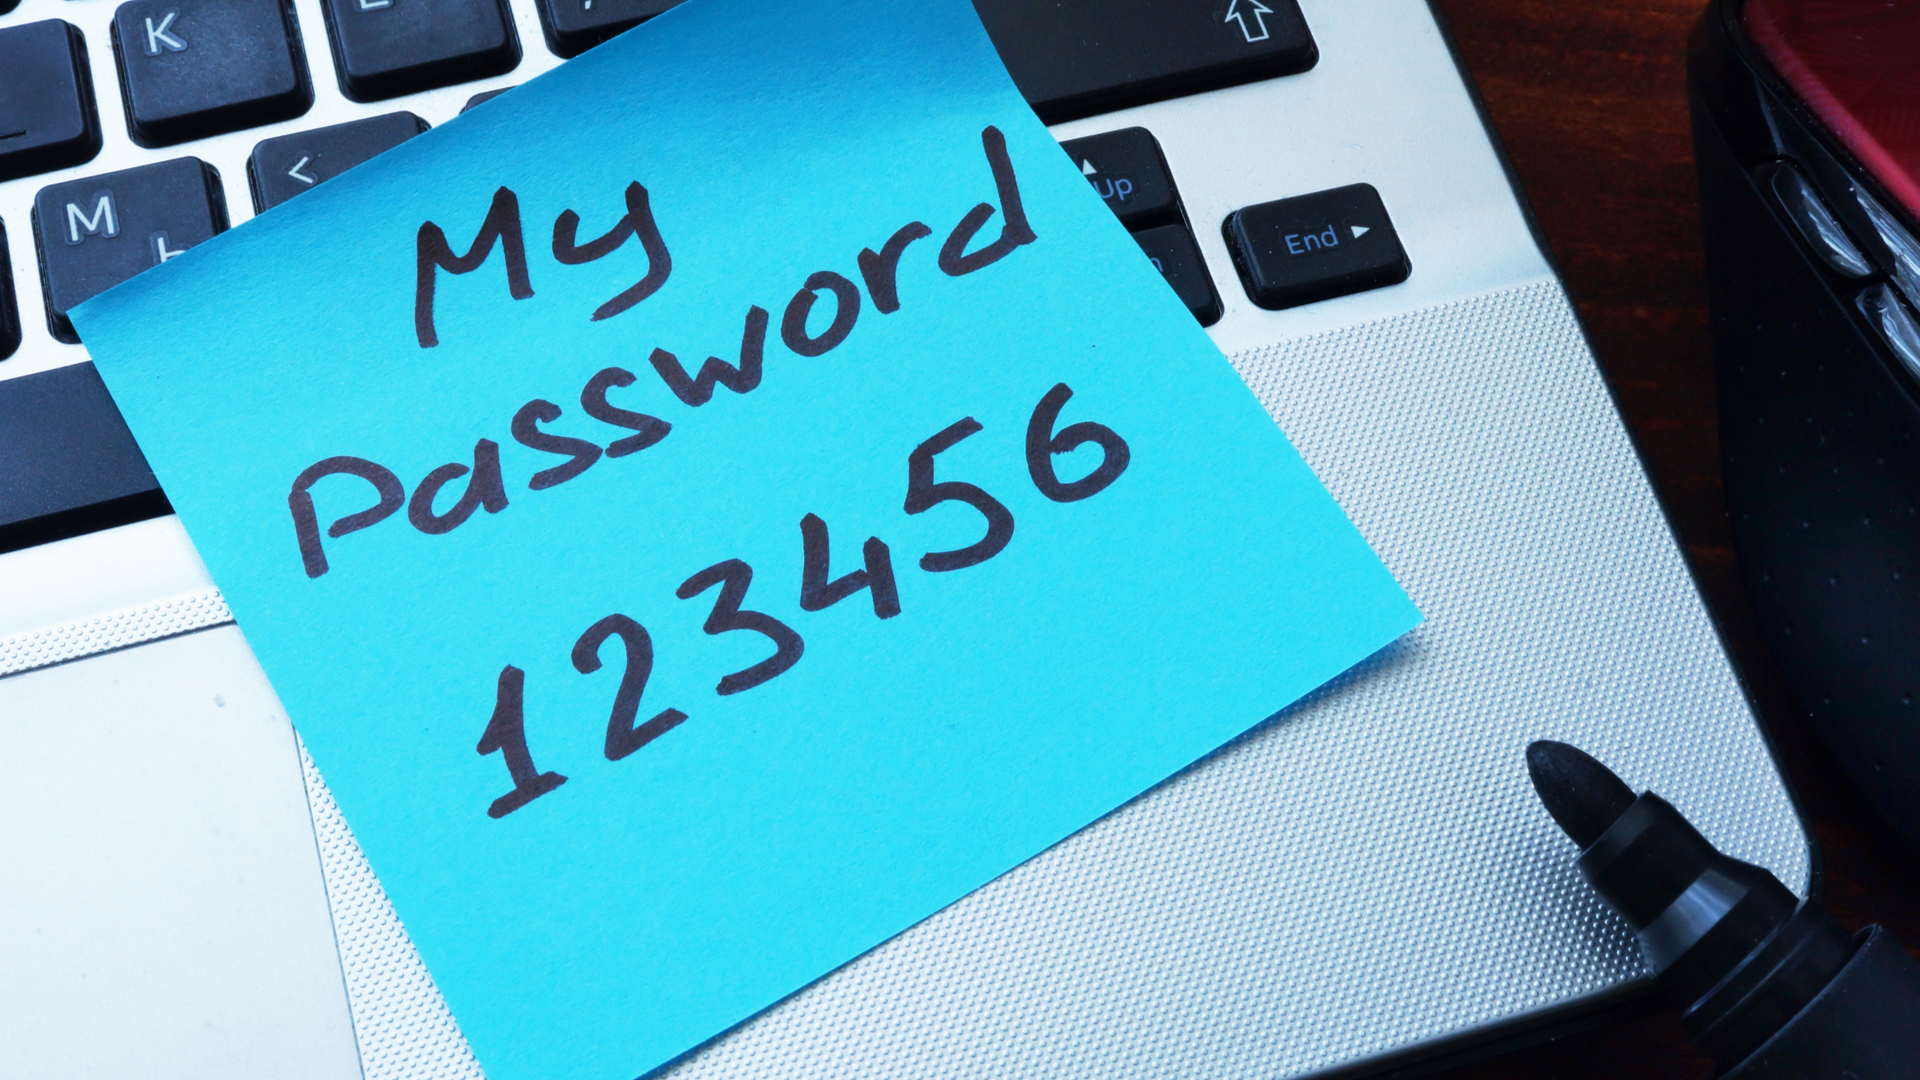 a post it note with the words &quot;My password is 12345&quot;